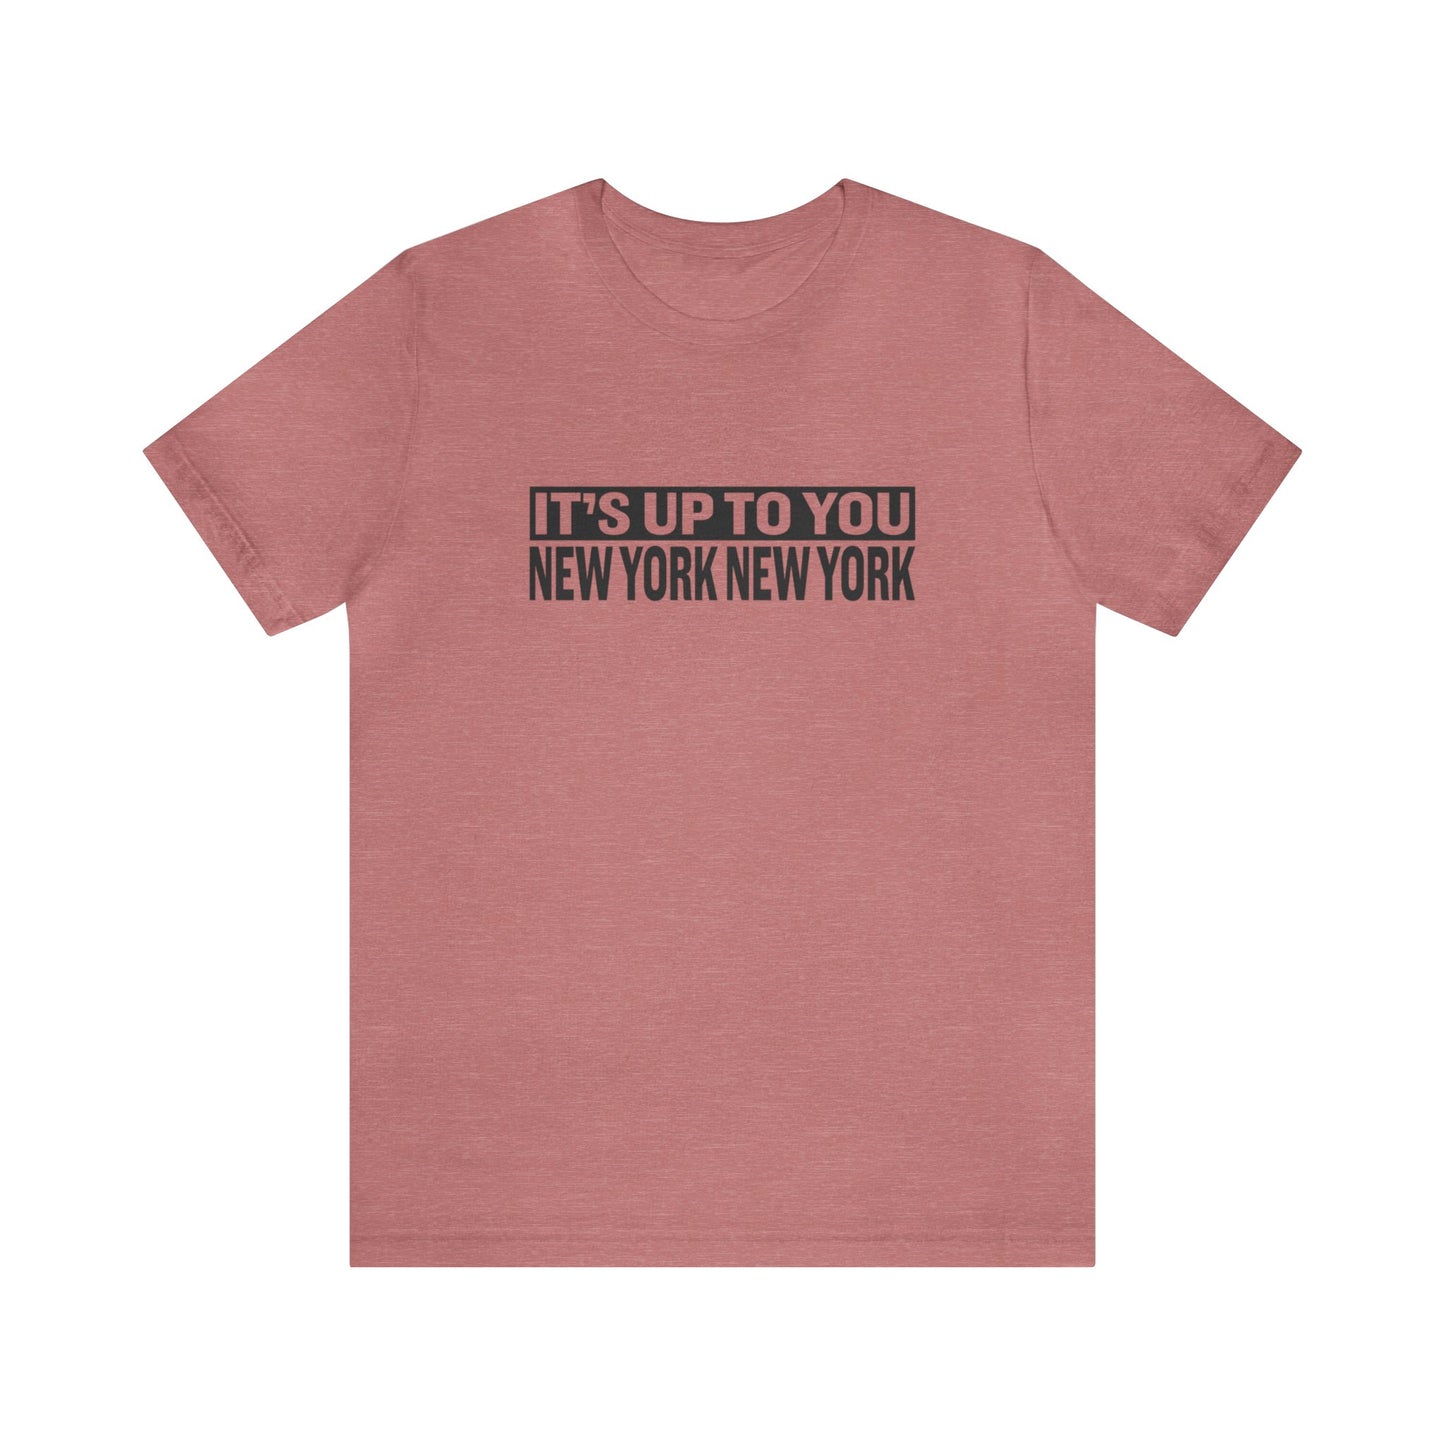 It's Up to You New York New York - Unisex T-Shirt